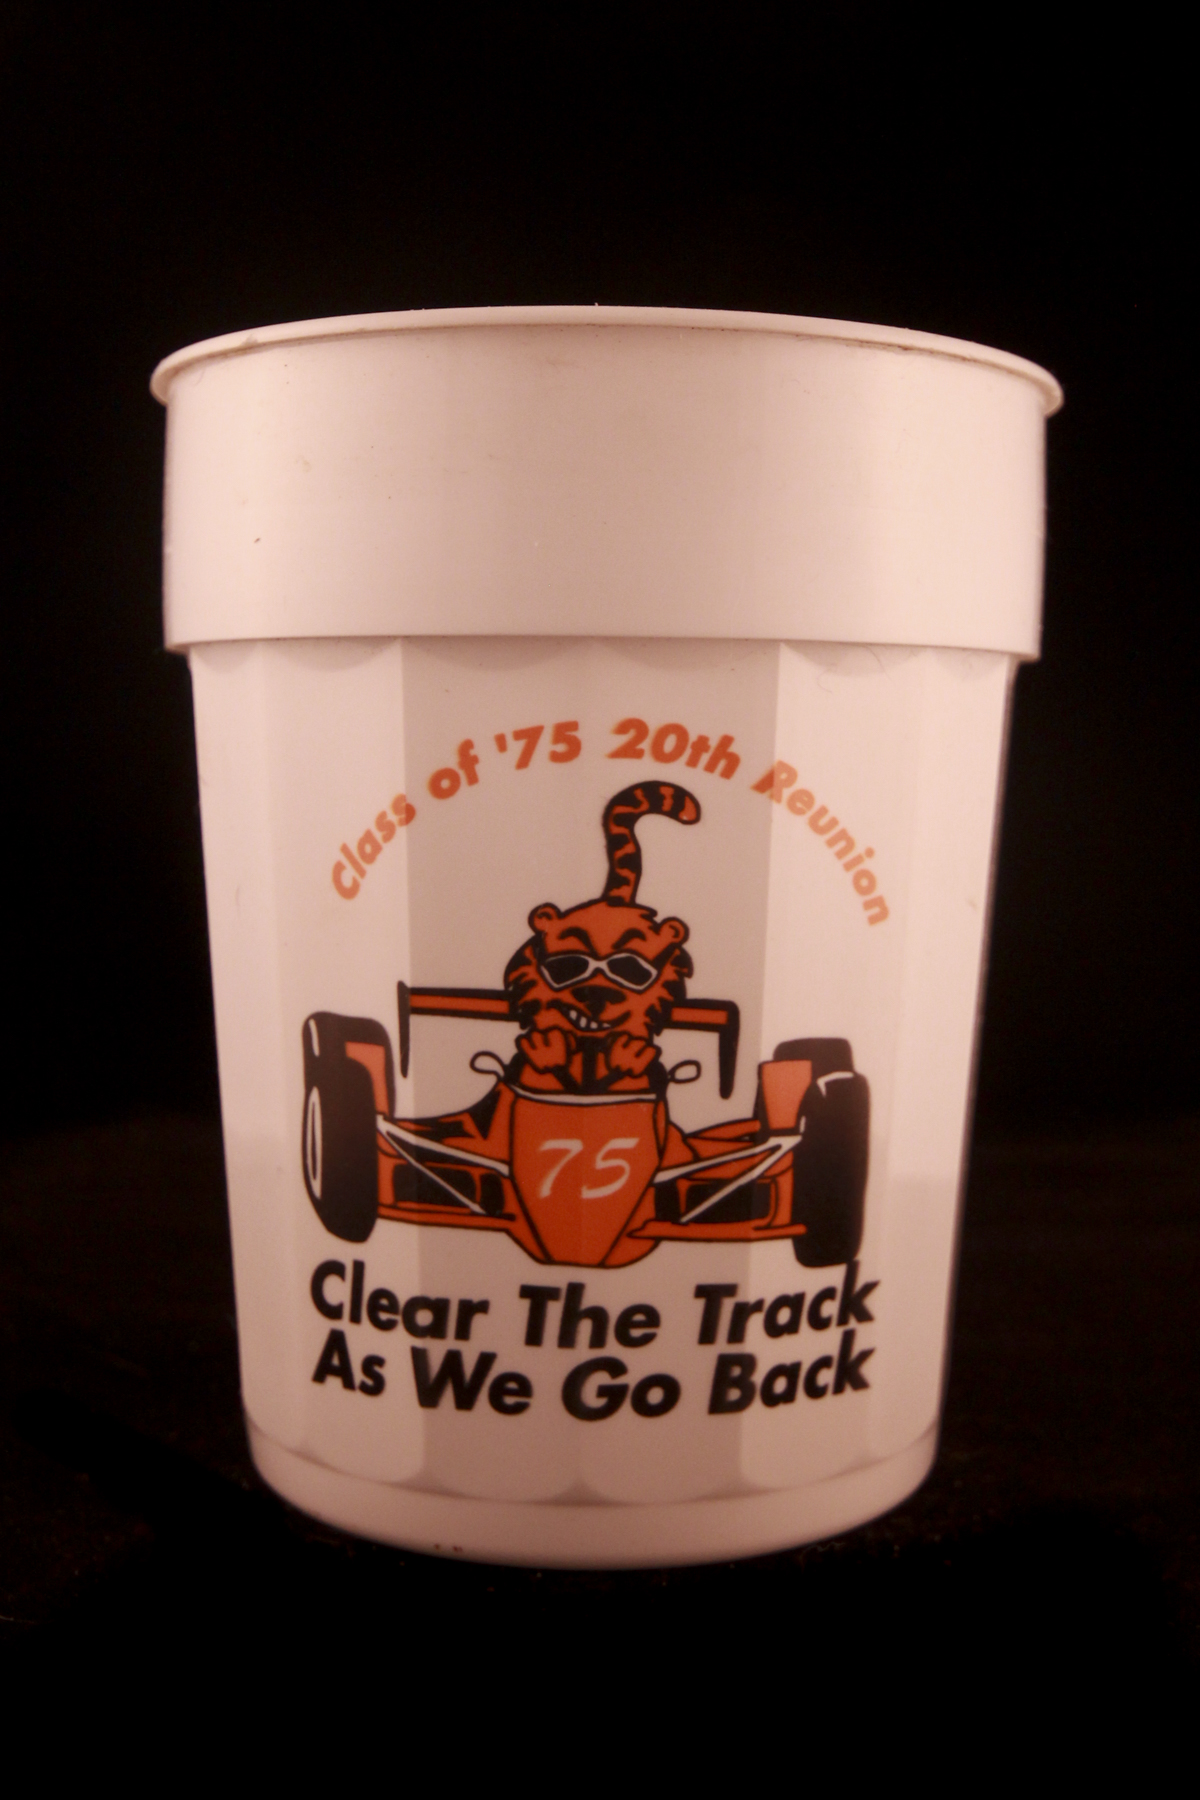 Beer Cup 1975 20th Reunion